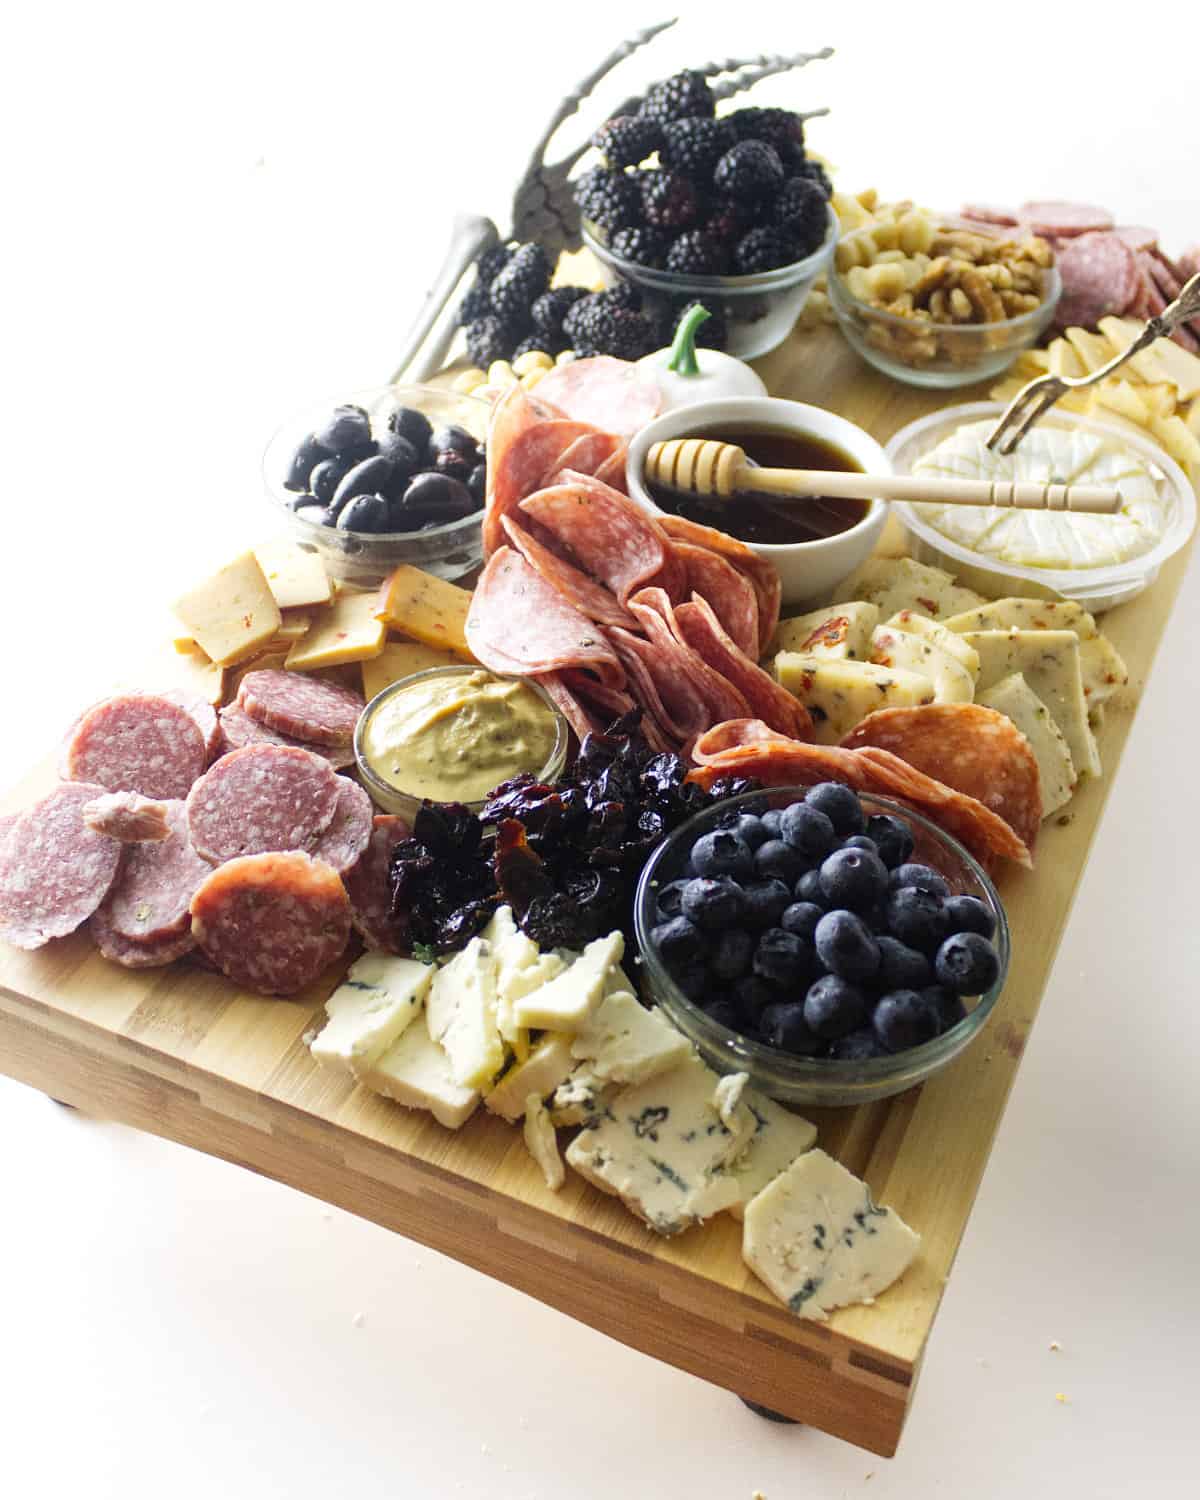 meats added with more cheese and fruit to platter.